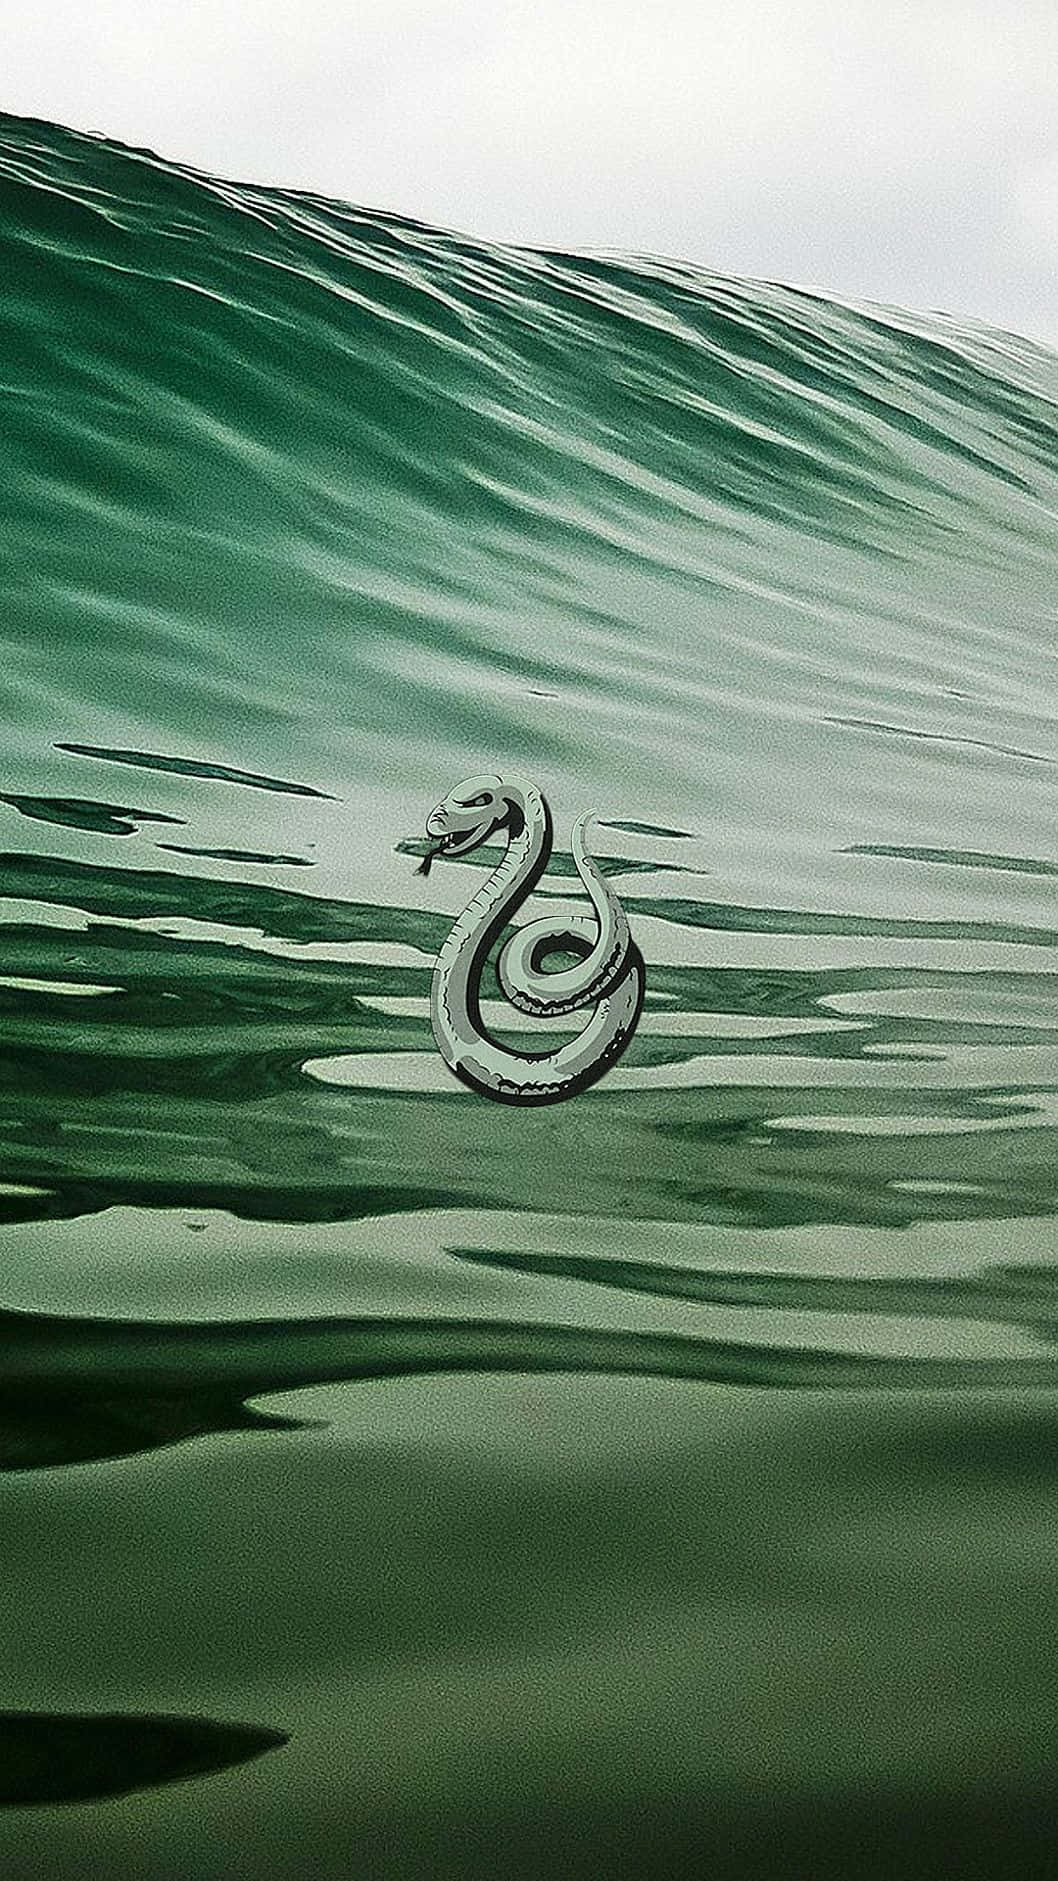 A Snake Logo On The Surface Of A Green Wave Wallpaper